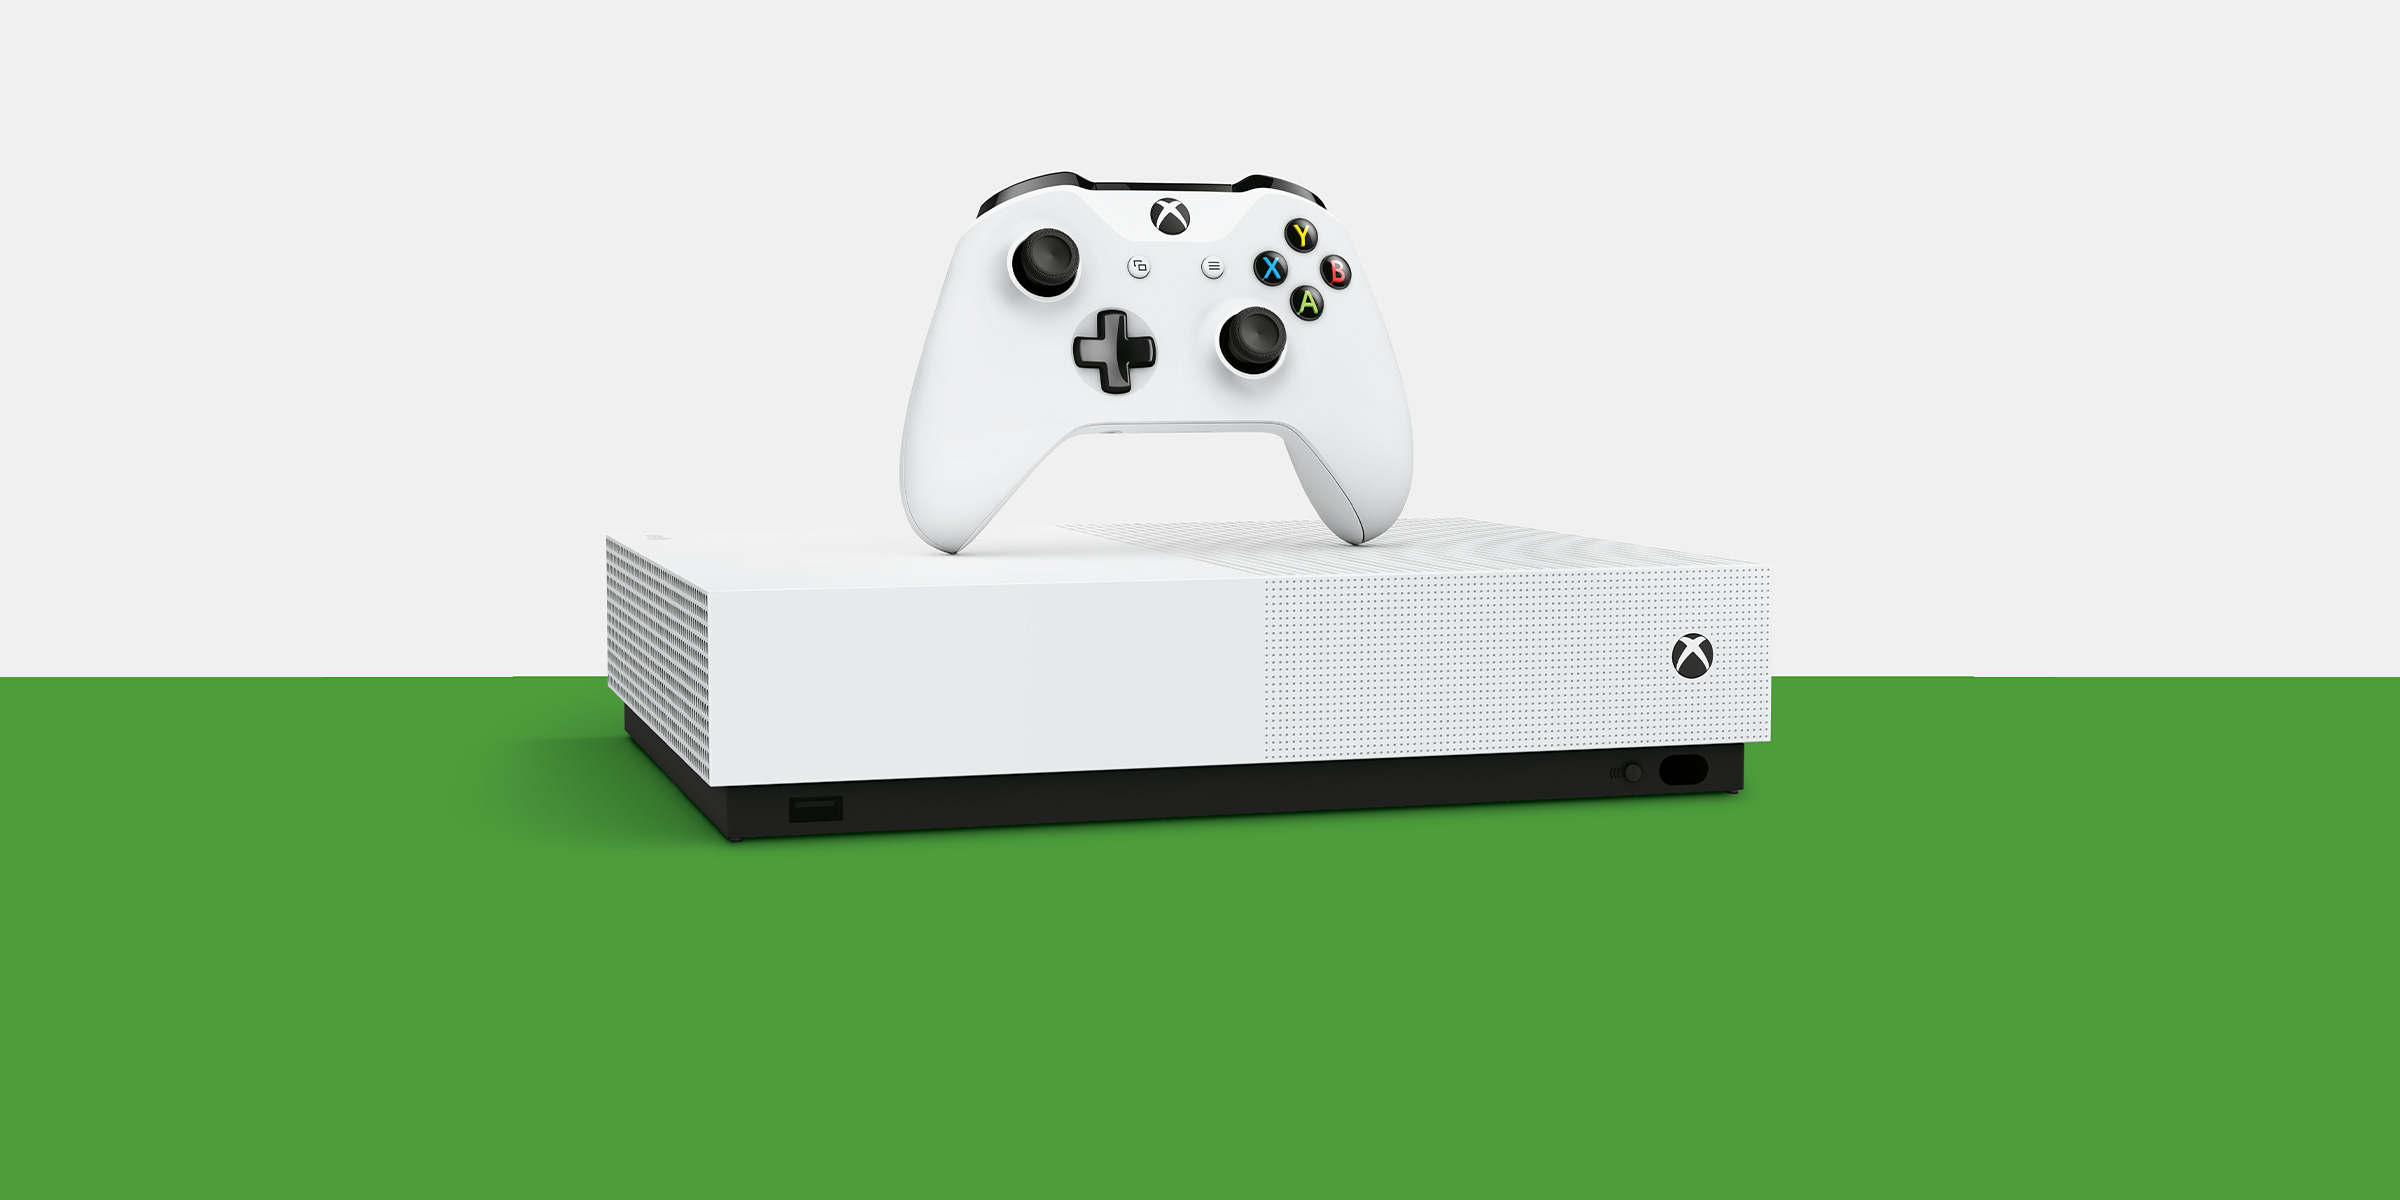 all digital xbox one s 1tb console & controller